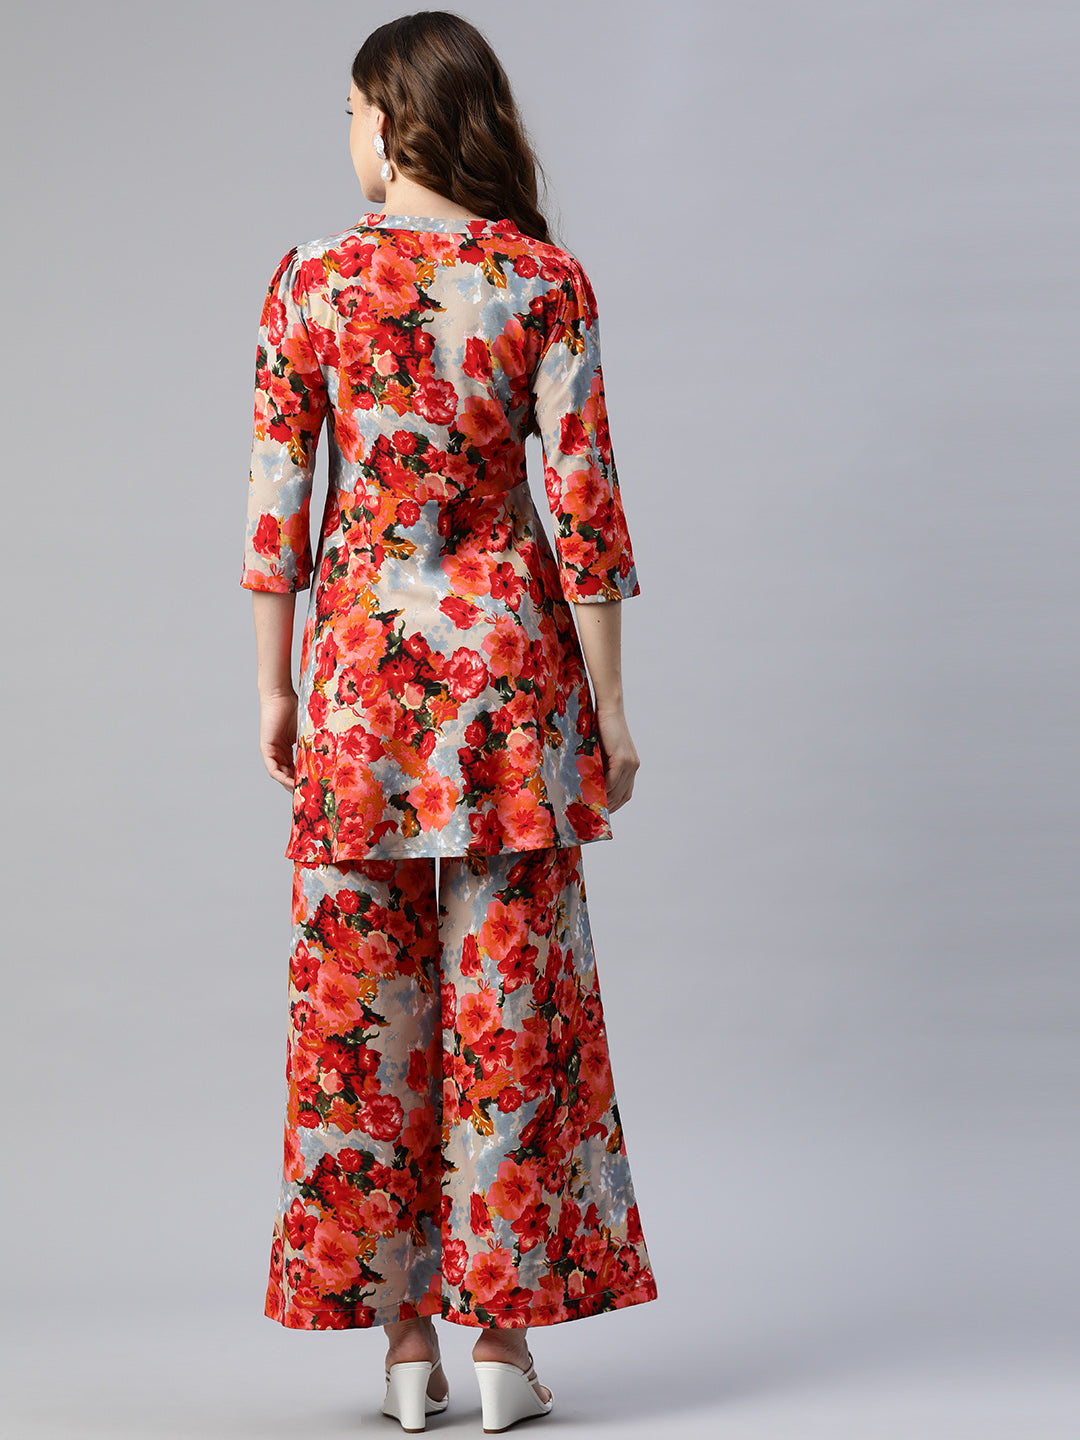 Cottinfab Women Floral Printed Top and Trousers Co-Ord